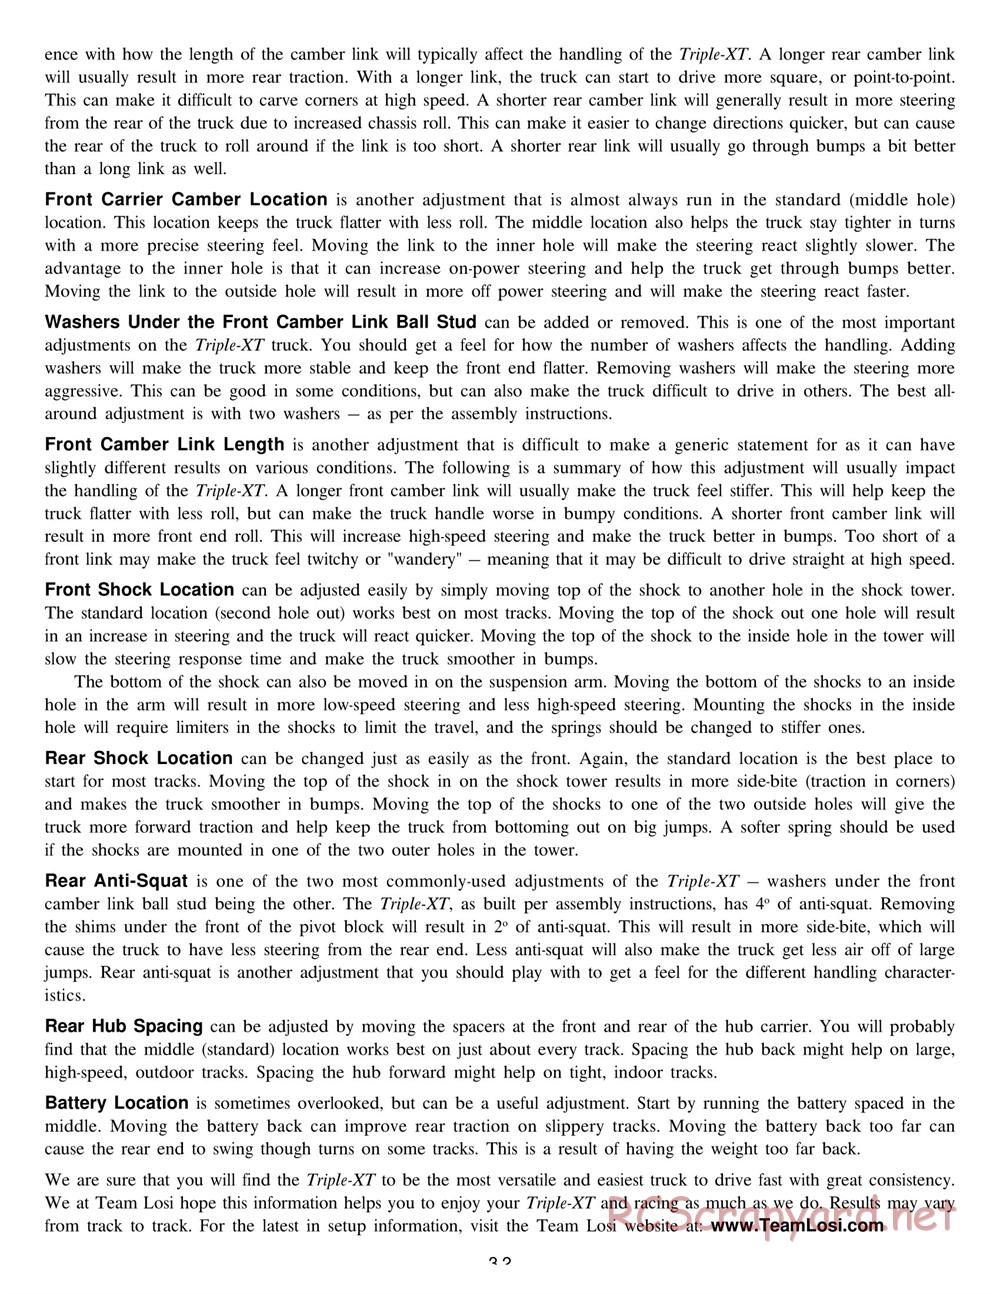 Team Losi - XXXT Sport RTRII - Manual - Page 36